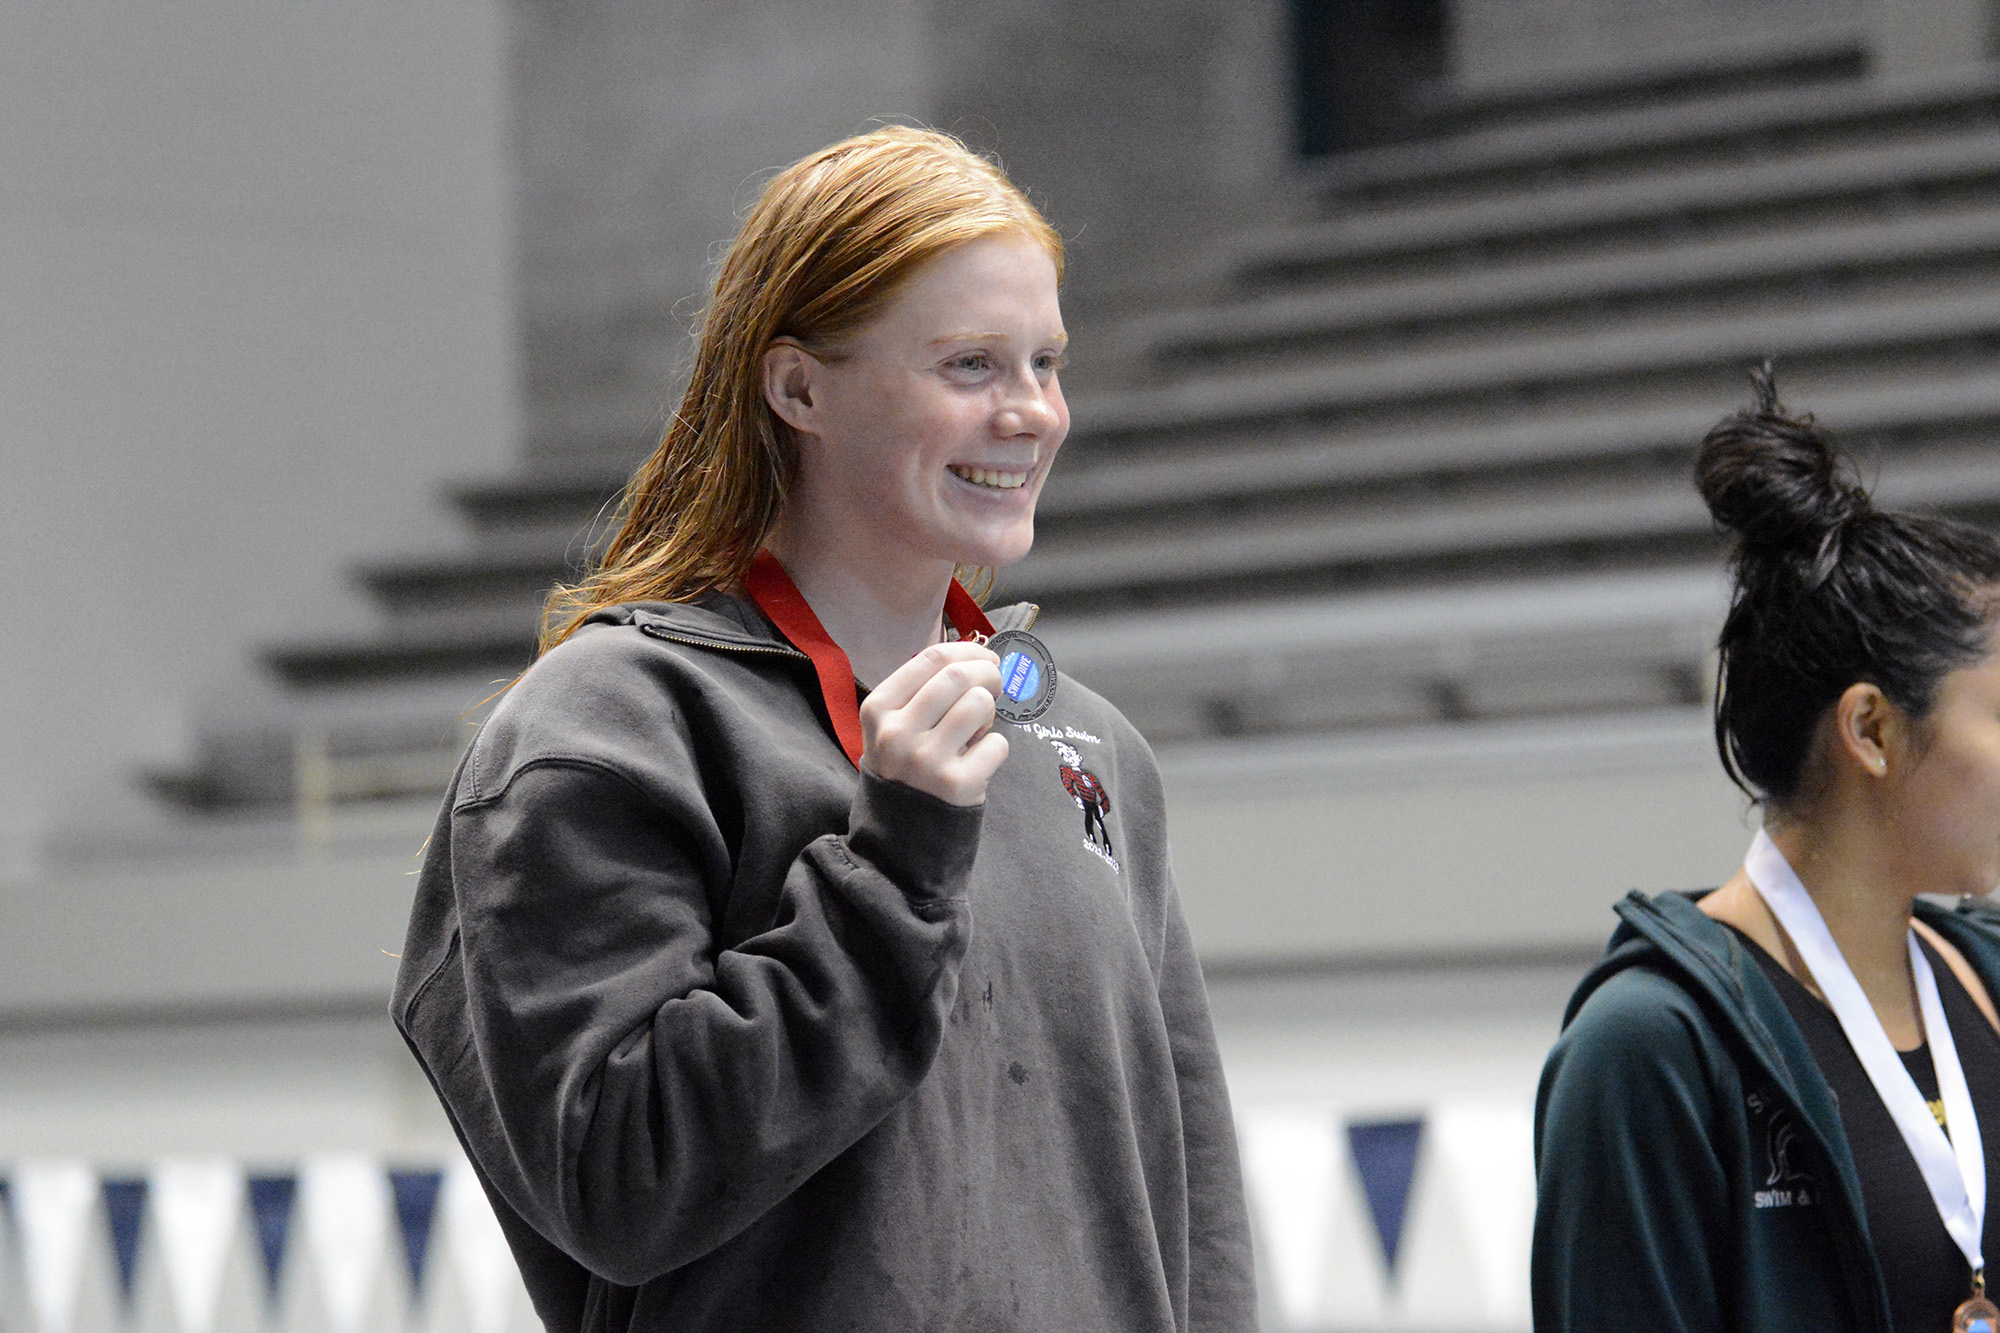 Campbell Deringer of Camas holds her medal after placing second in the 100 breaststroke in the Class 4A meet at the state swim meet at Federal Way on Saturday, Nov. 12, 2022.